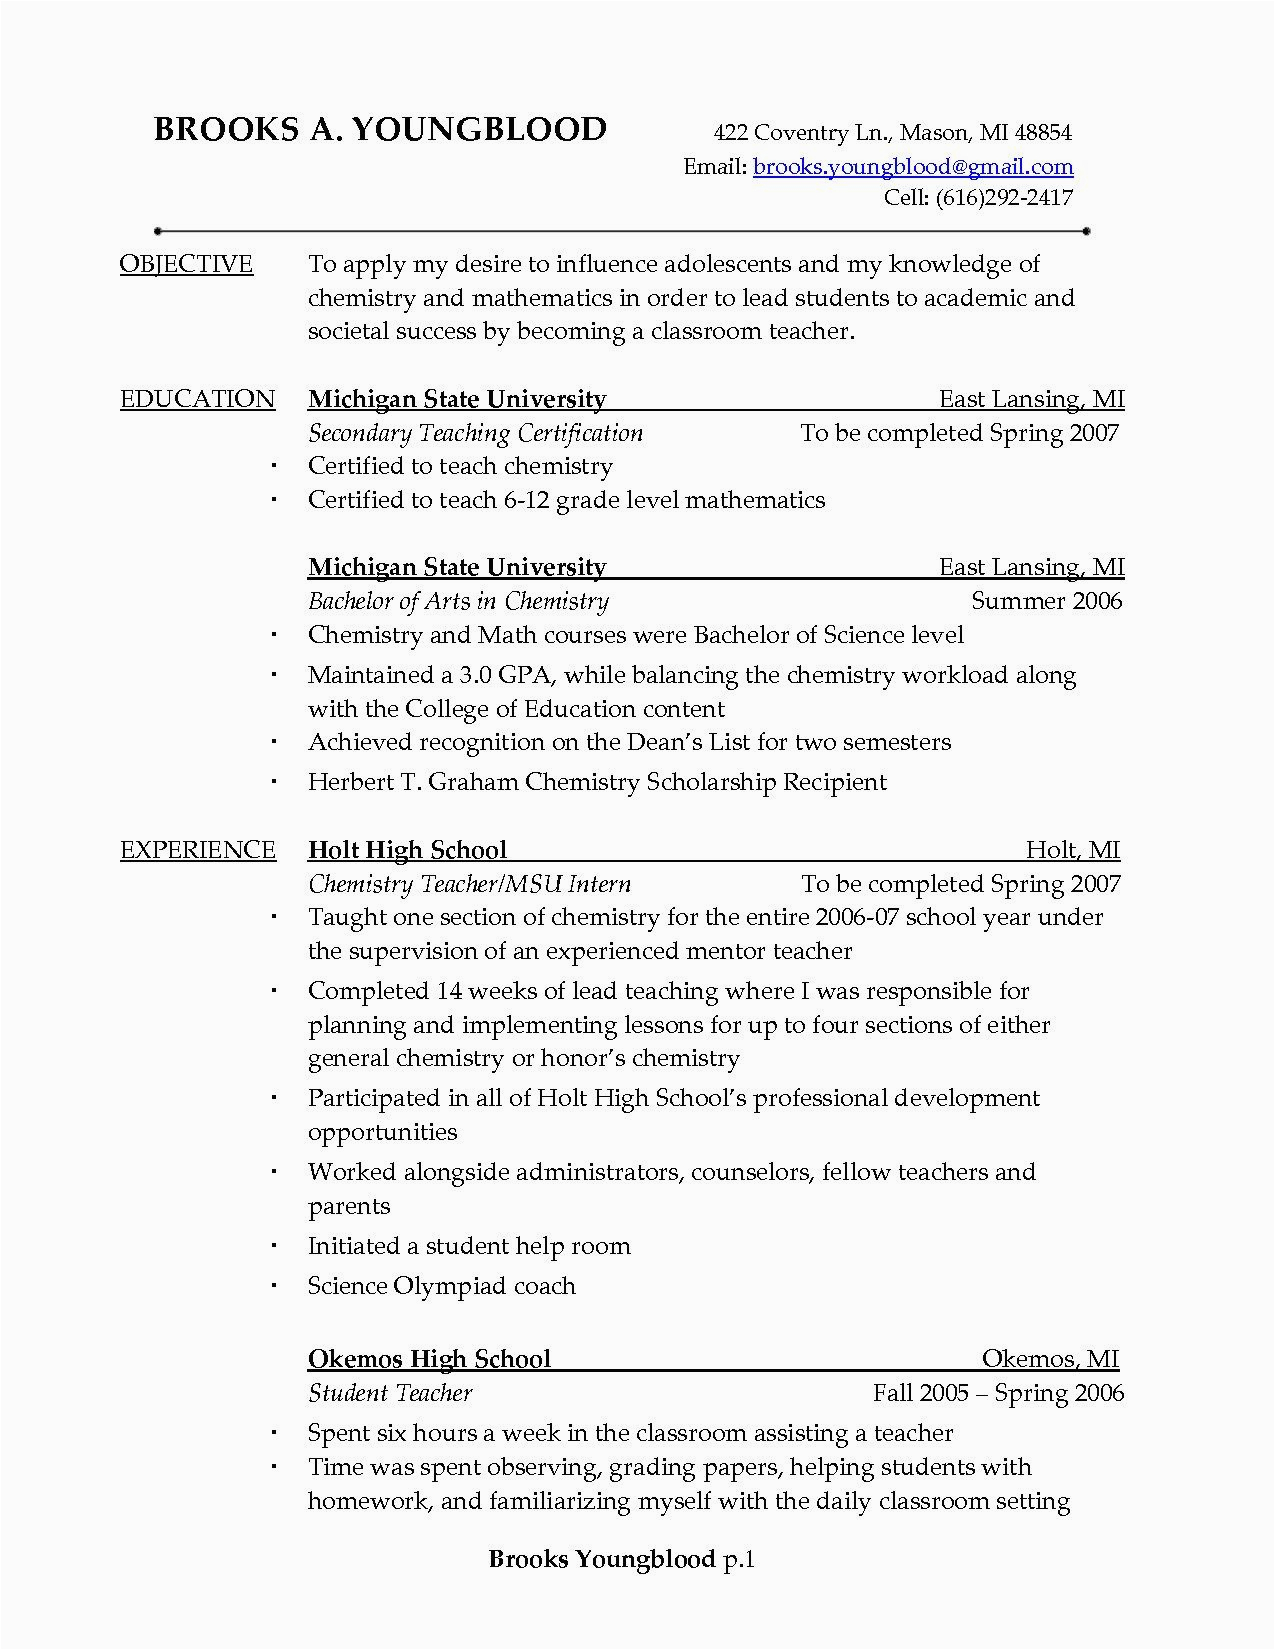 Hr Resume Sample for 1 Year Experience 0 1 Year Experience Resume format